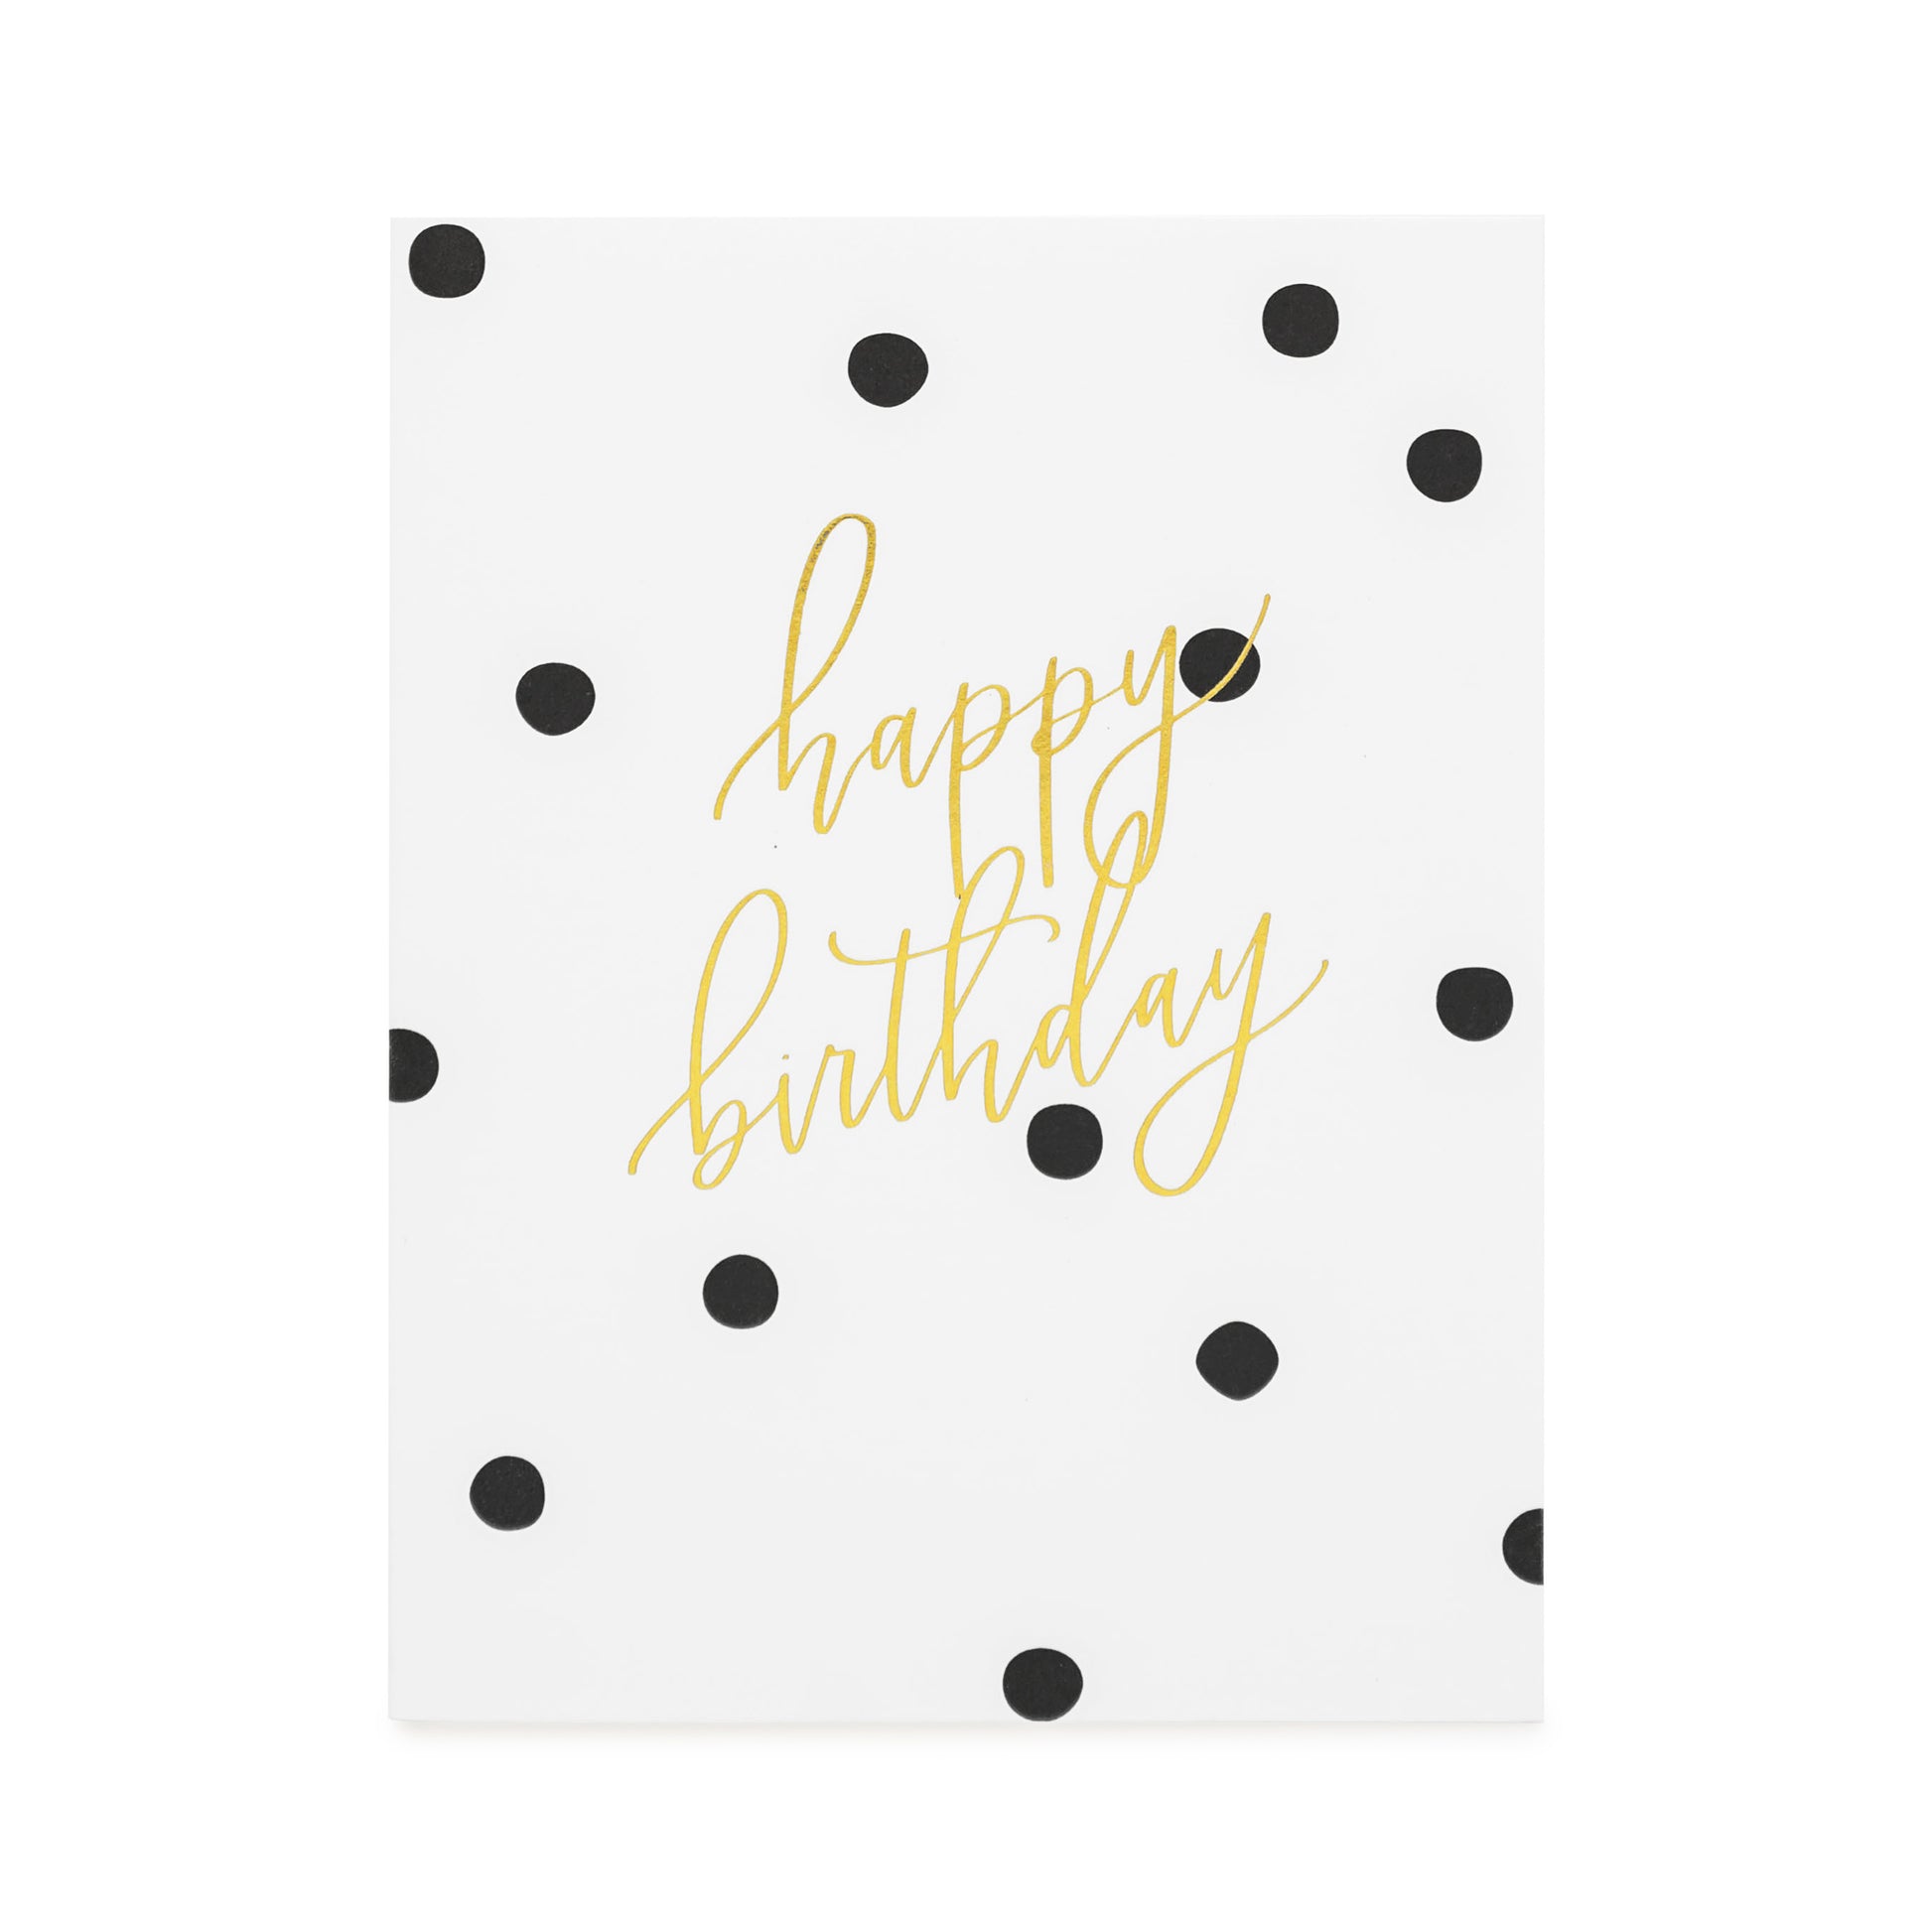 Assorted All-Occasion Handmade Greeting Cards in Black Scattered Dot  Organizer - Boxed Cards